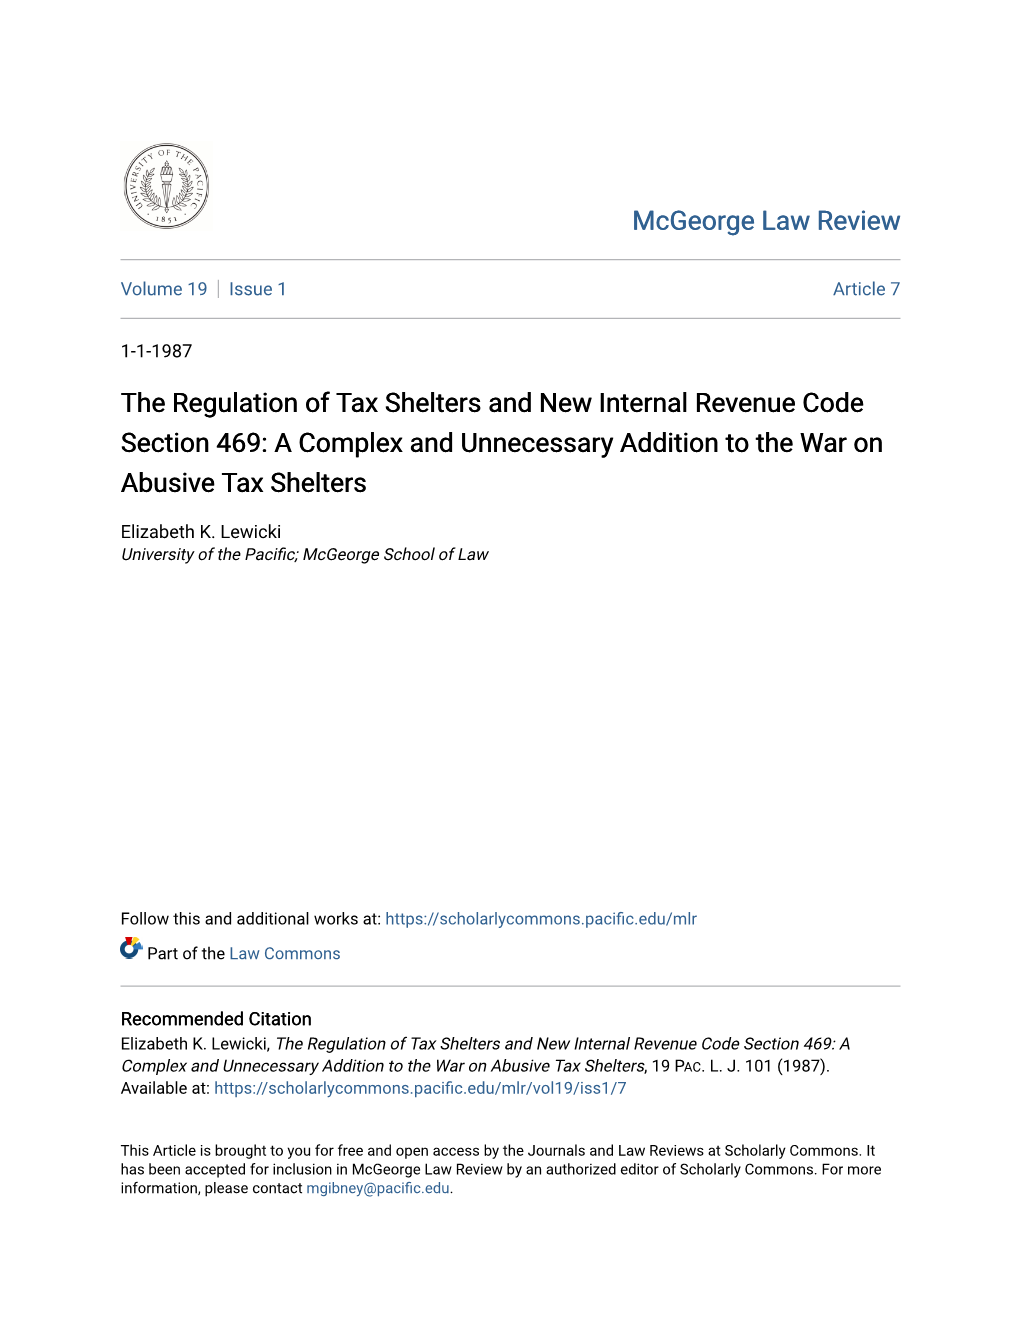 The Regulation of Tax Shelters and New Internal Revenue Code Section 469: a Complex and Unnecessary Addition to the War on Abusive Tax Shelters